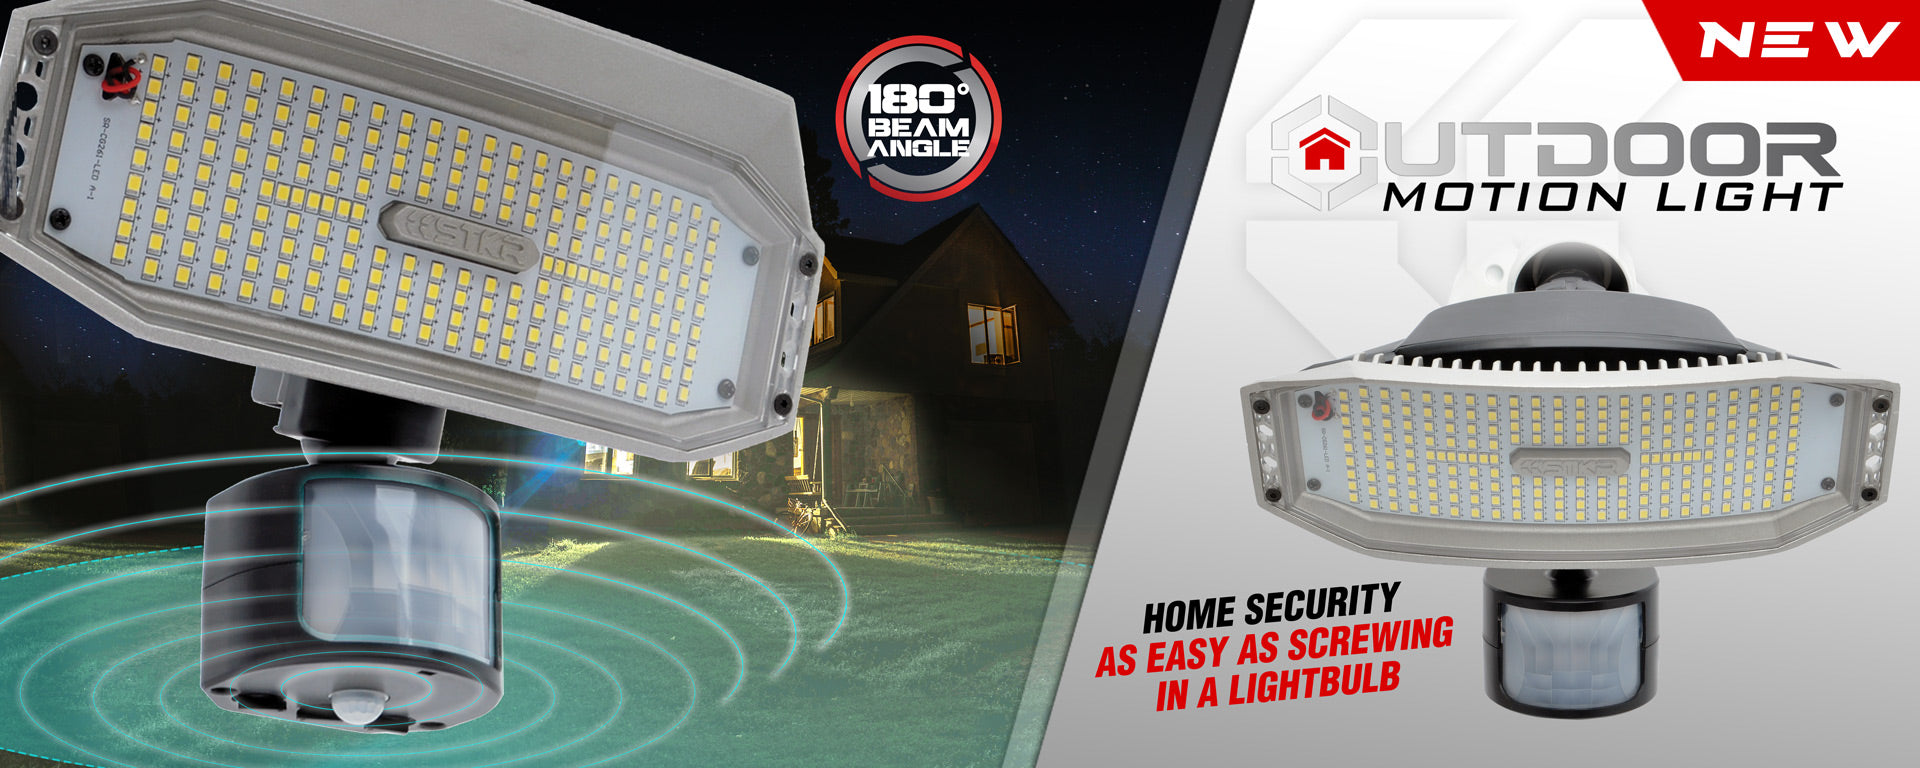 Outdoor motion home secutity light banner featuring two pics of the product. text reads: home security, as easy as screwing in a lightbulb. 180 degree beam angle